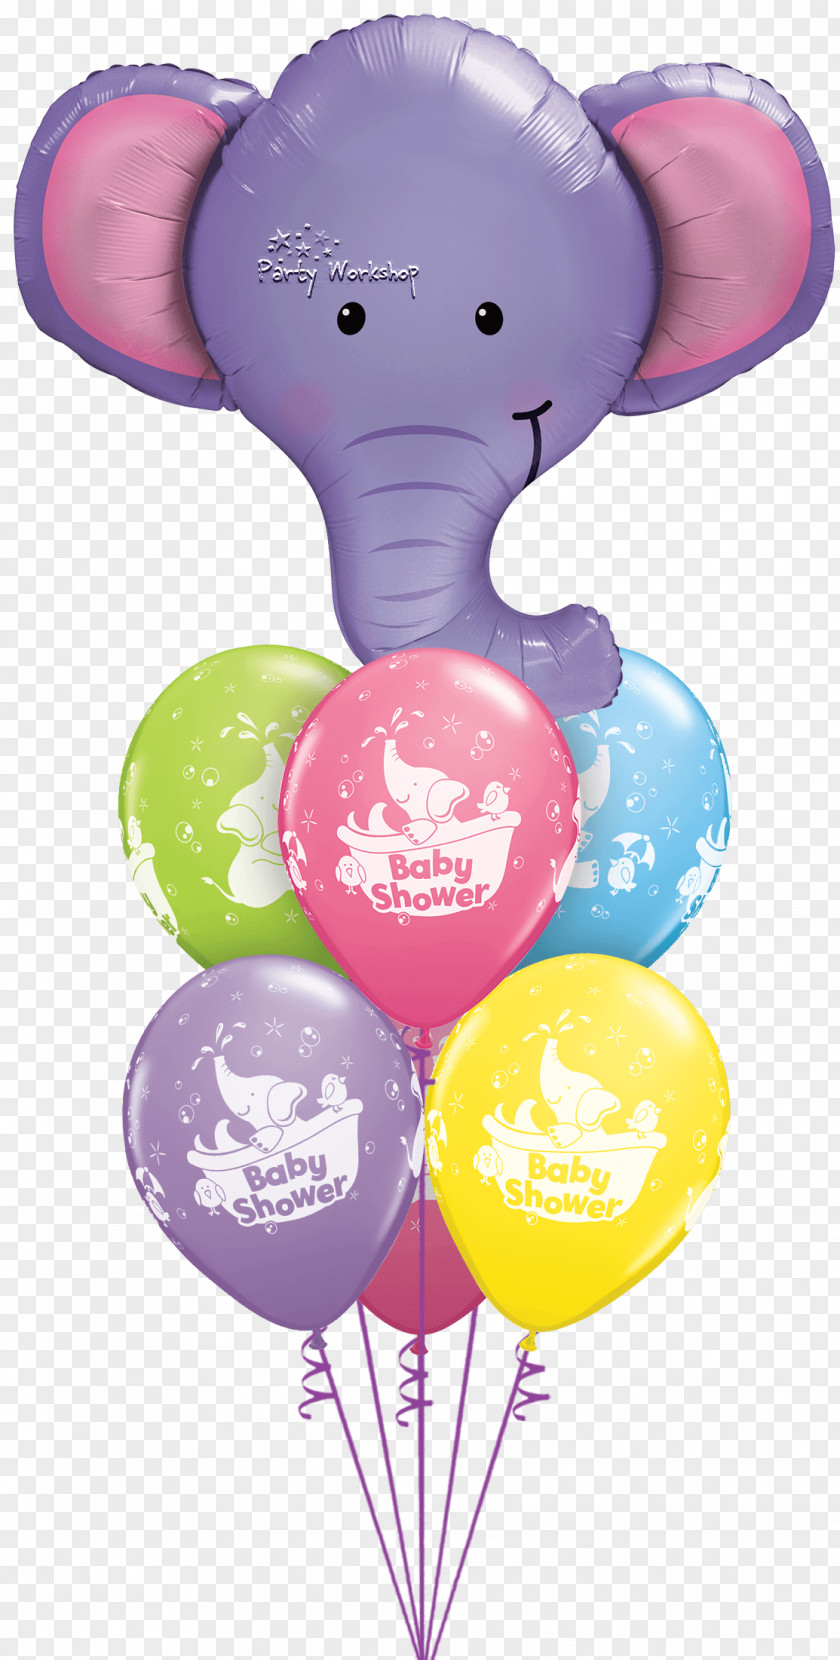 Baby Shower Elephant Toy Balloon Party Birthday PNG